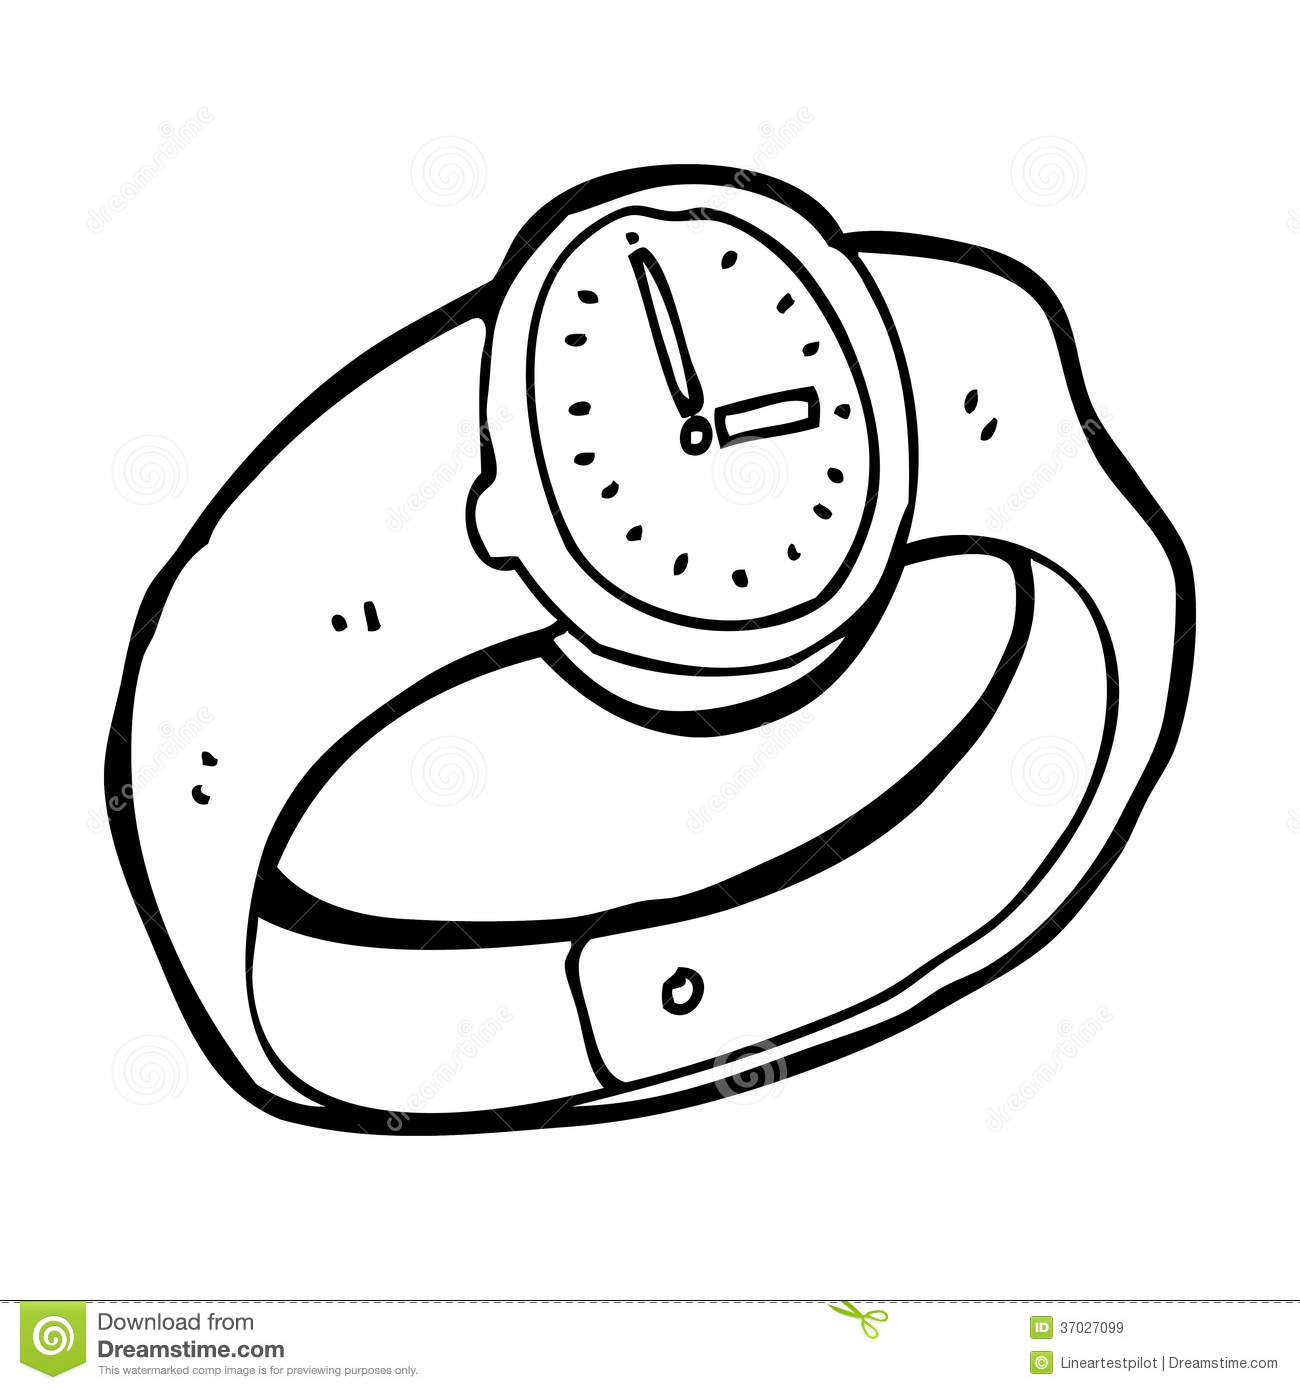 Watch clipart black and white